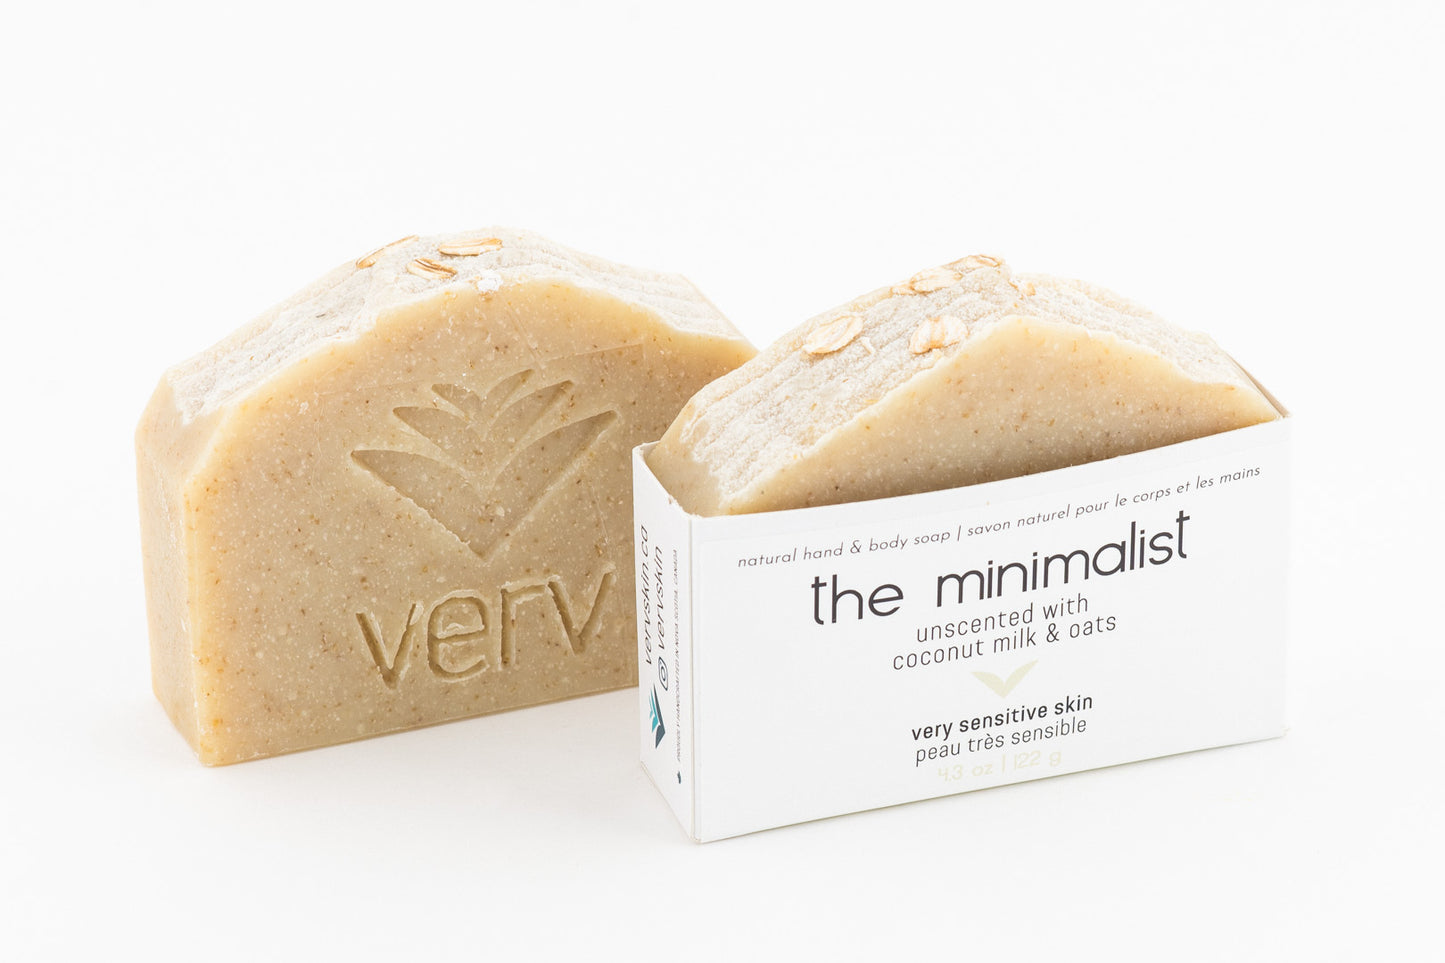 The Minimalist | Unscented with Coconut Milk & Oats